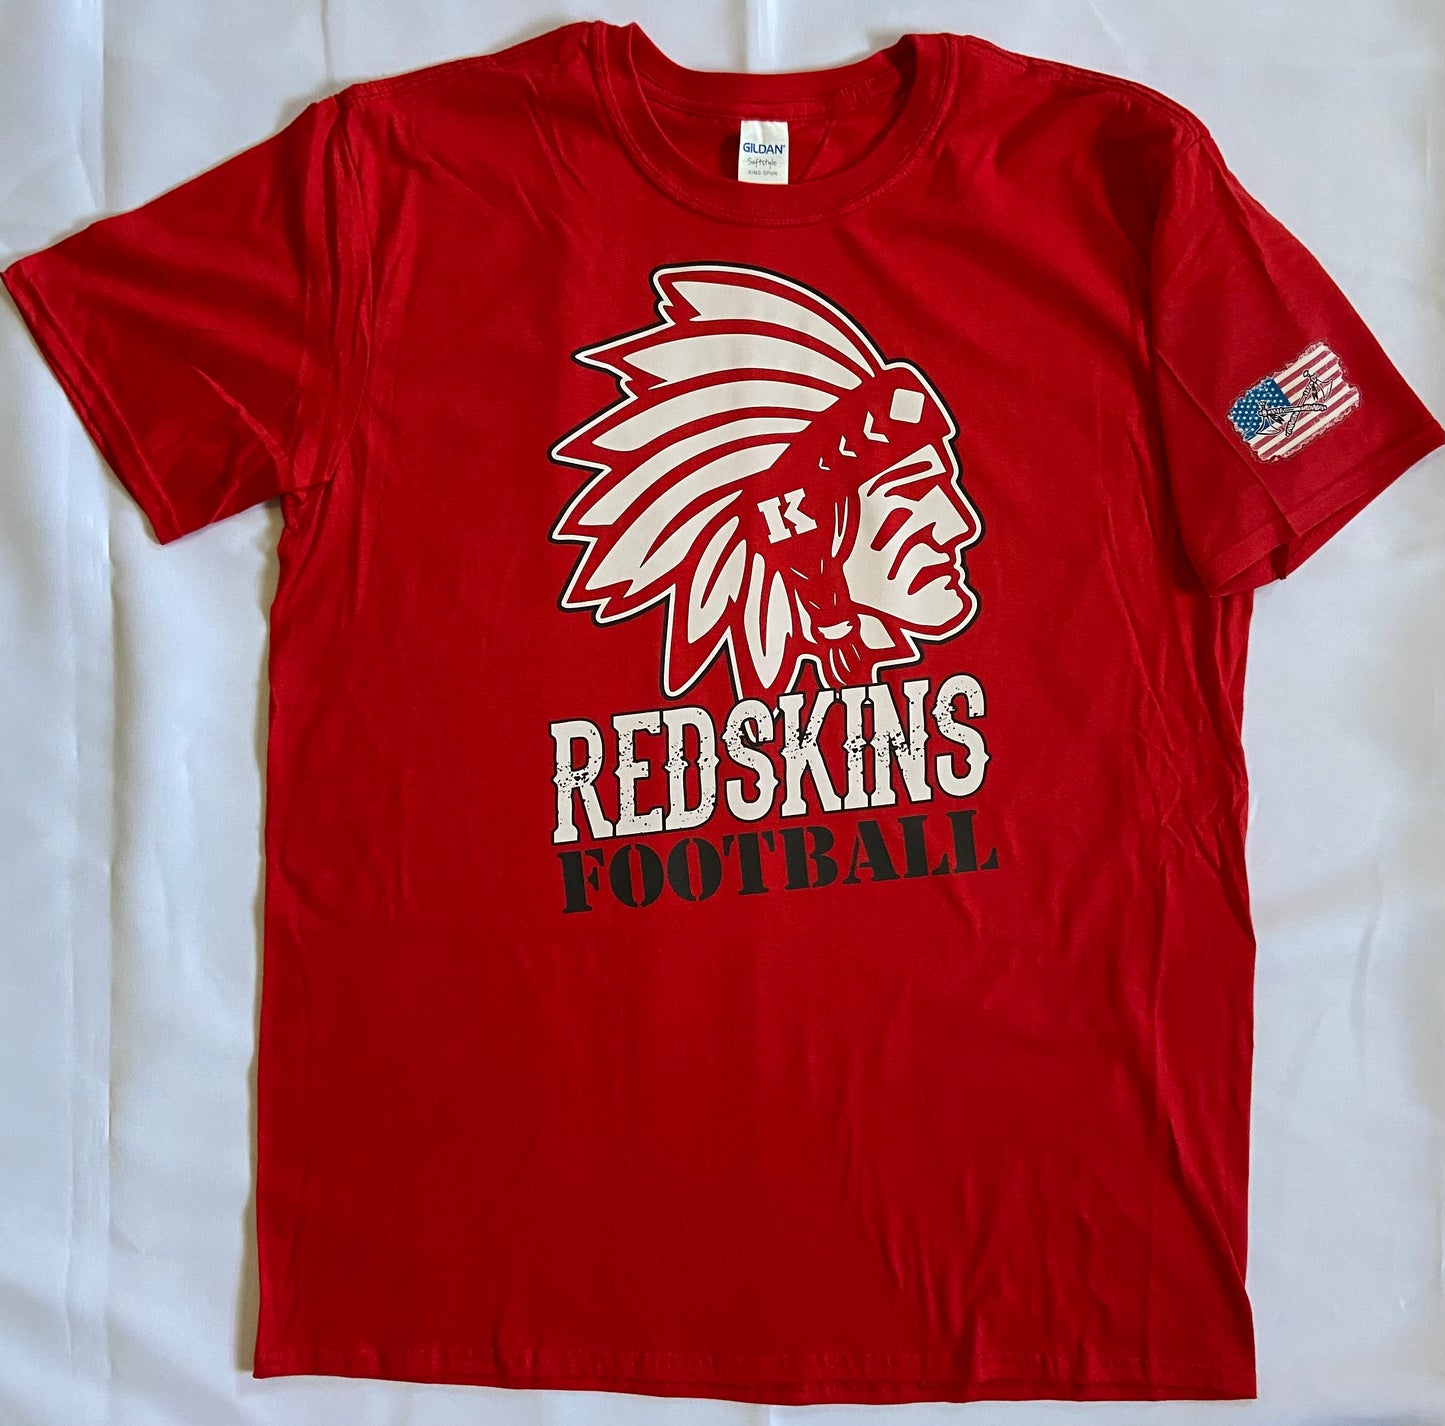 Knox Redskins Football T-shirt New Design Adult and Youth Sizes available